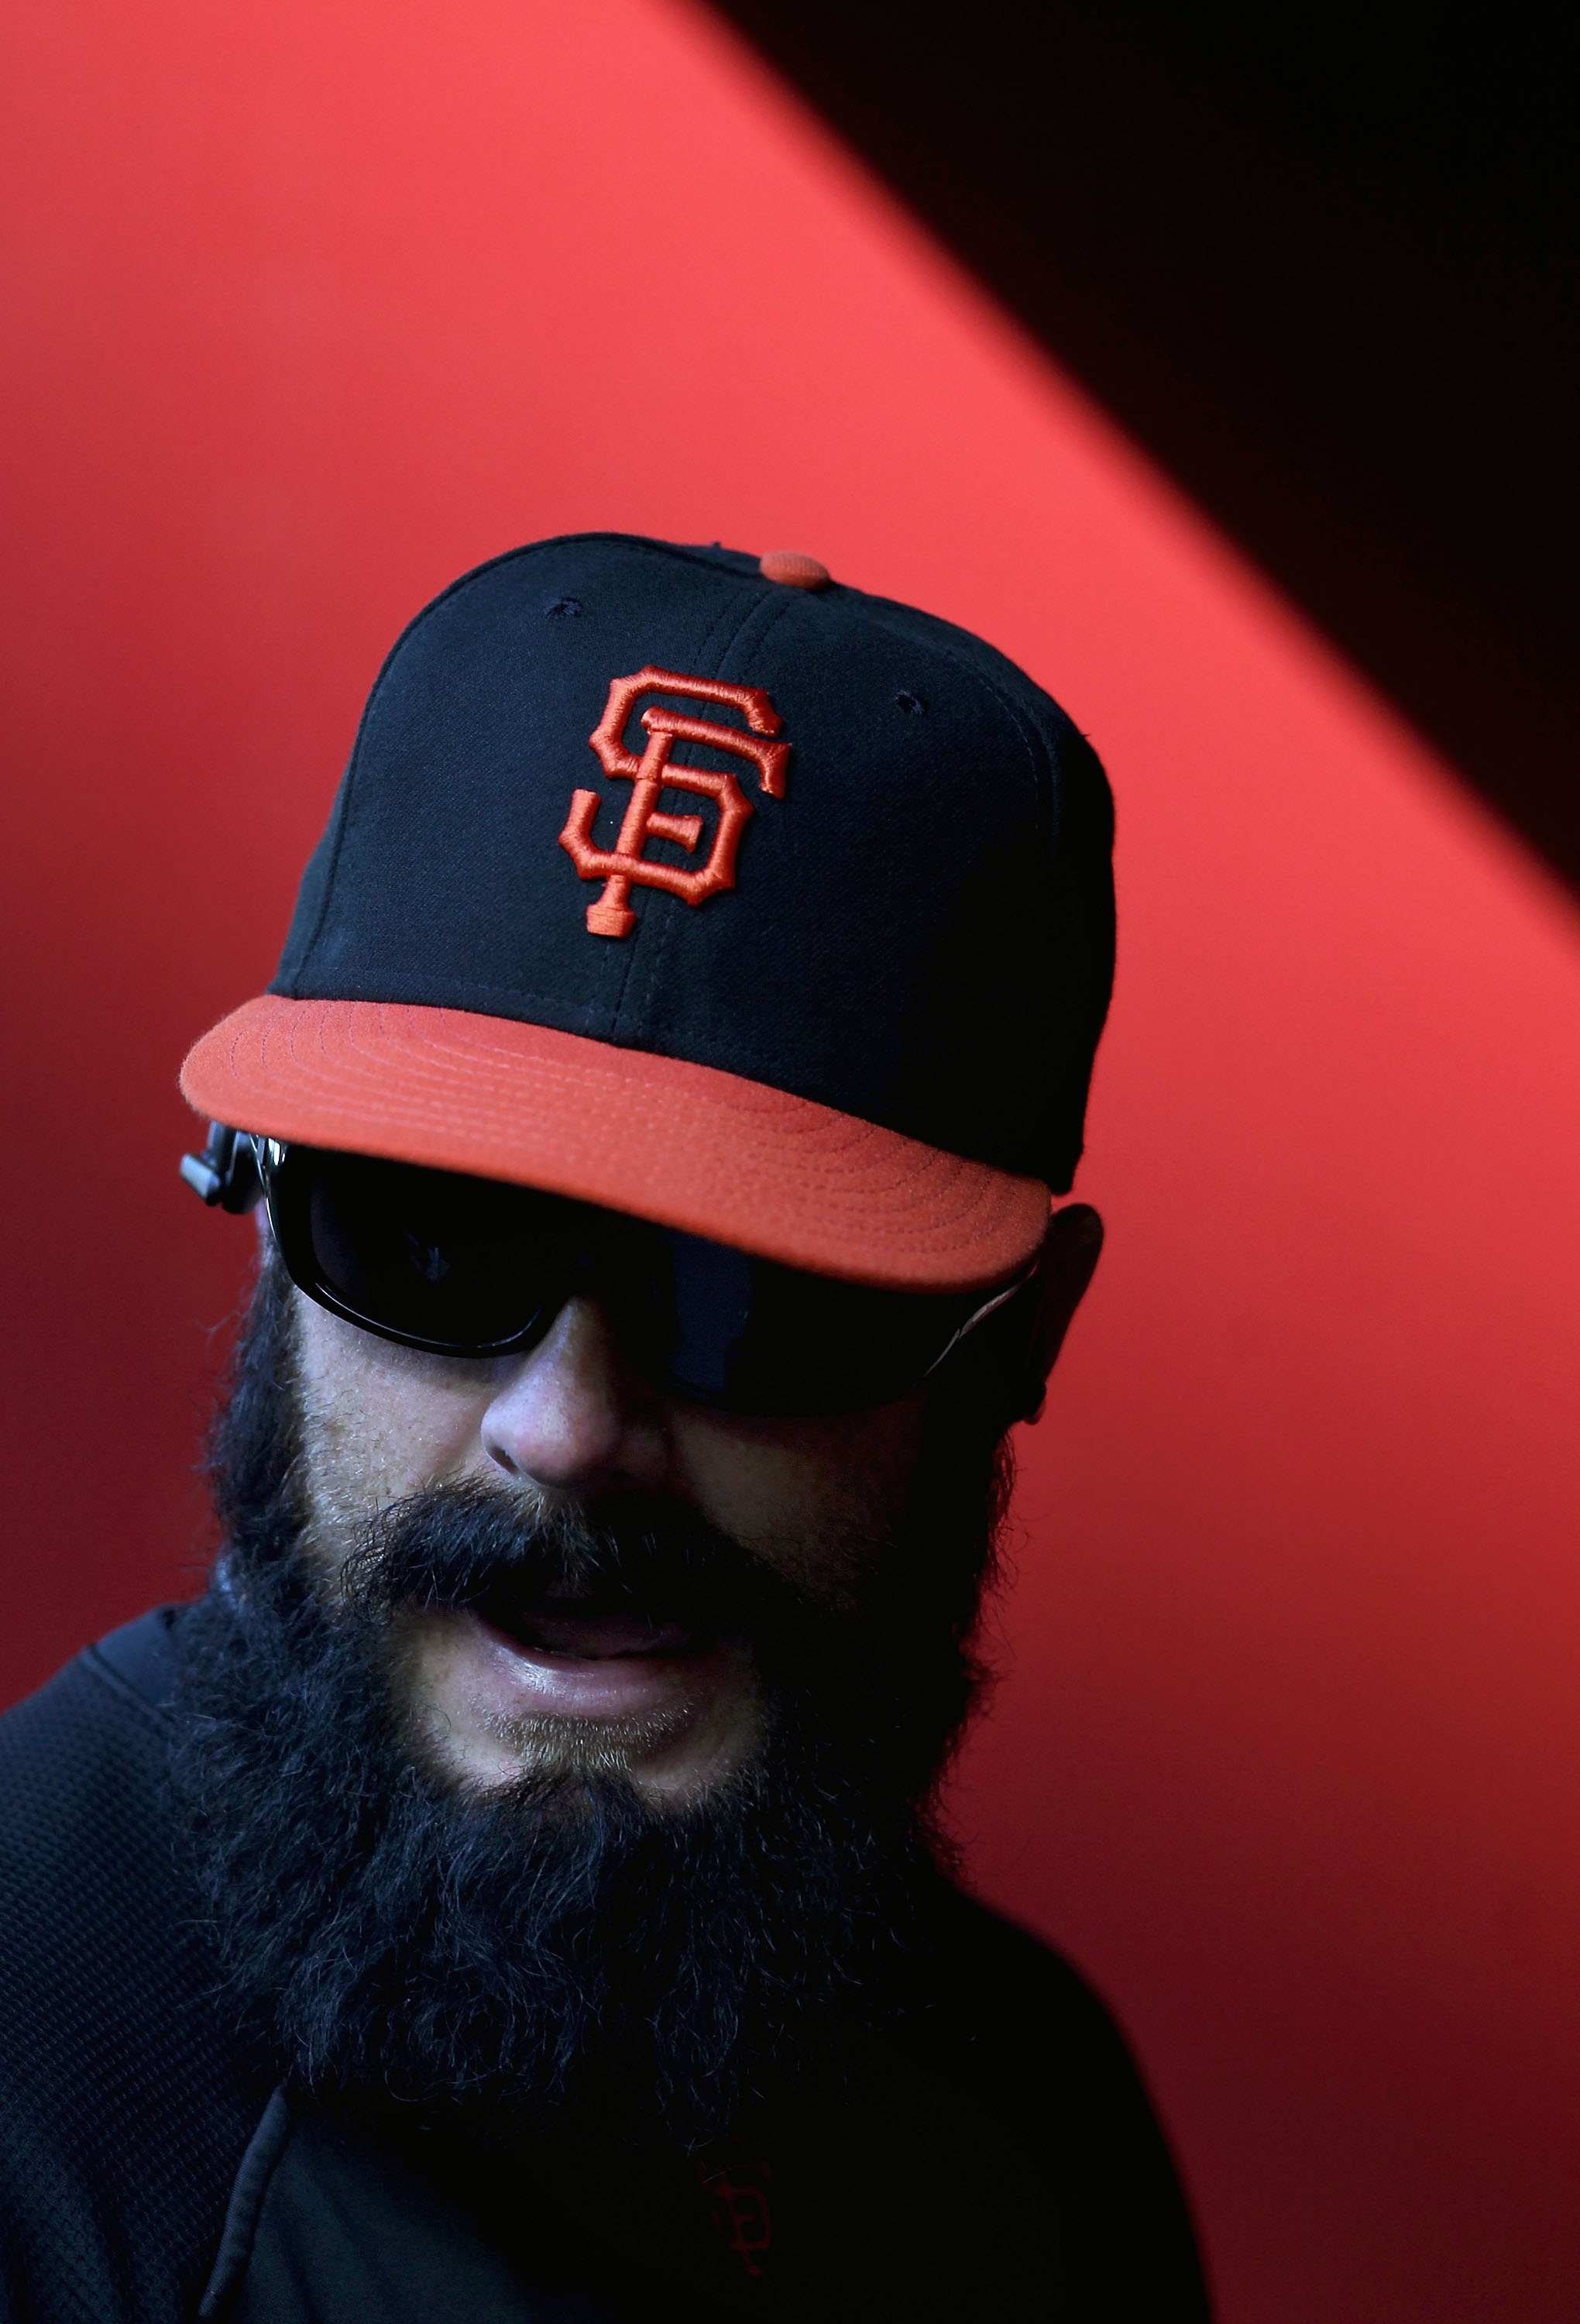 Brian Wilson's Giants career might be over, so let's reflect on